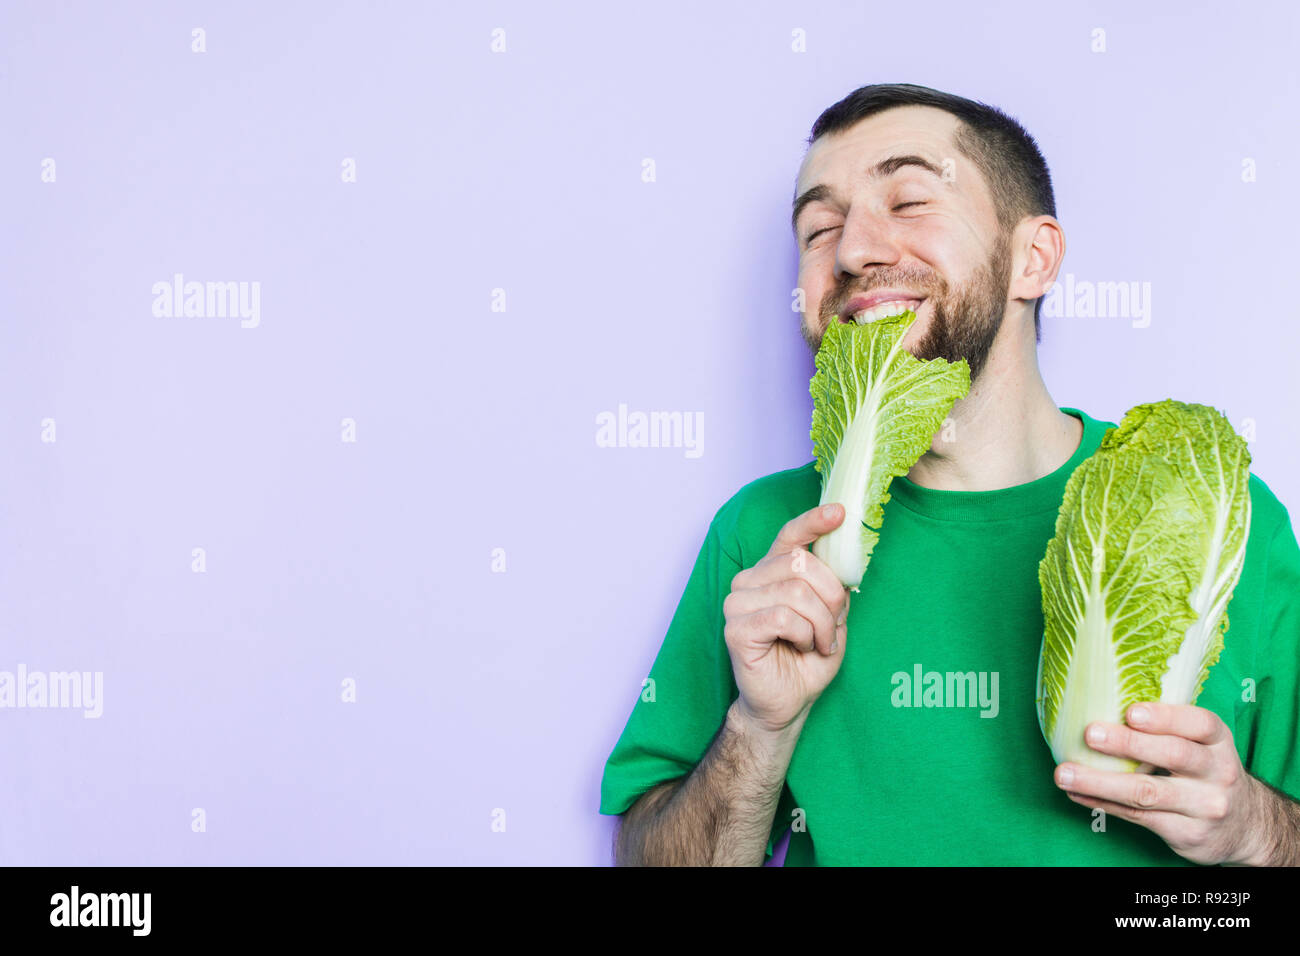 Young man biting on a leaf of Beijing napa cabbage, enjoyment face expression. Light purple background, copy space. Stock Photo